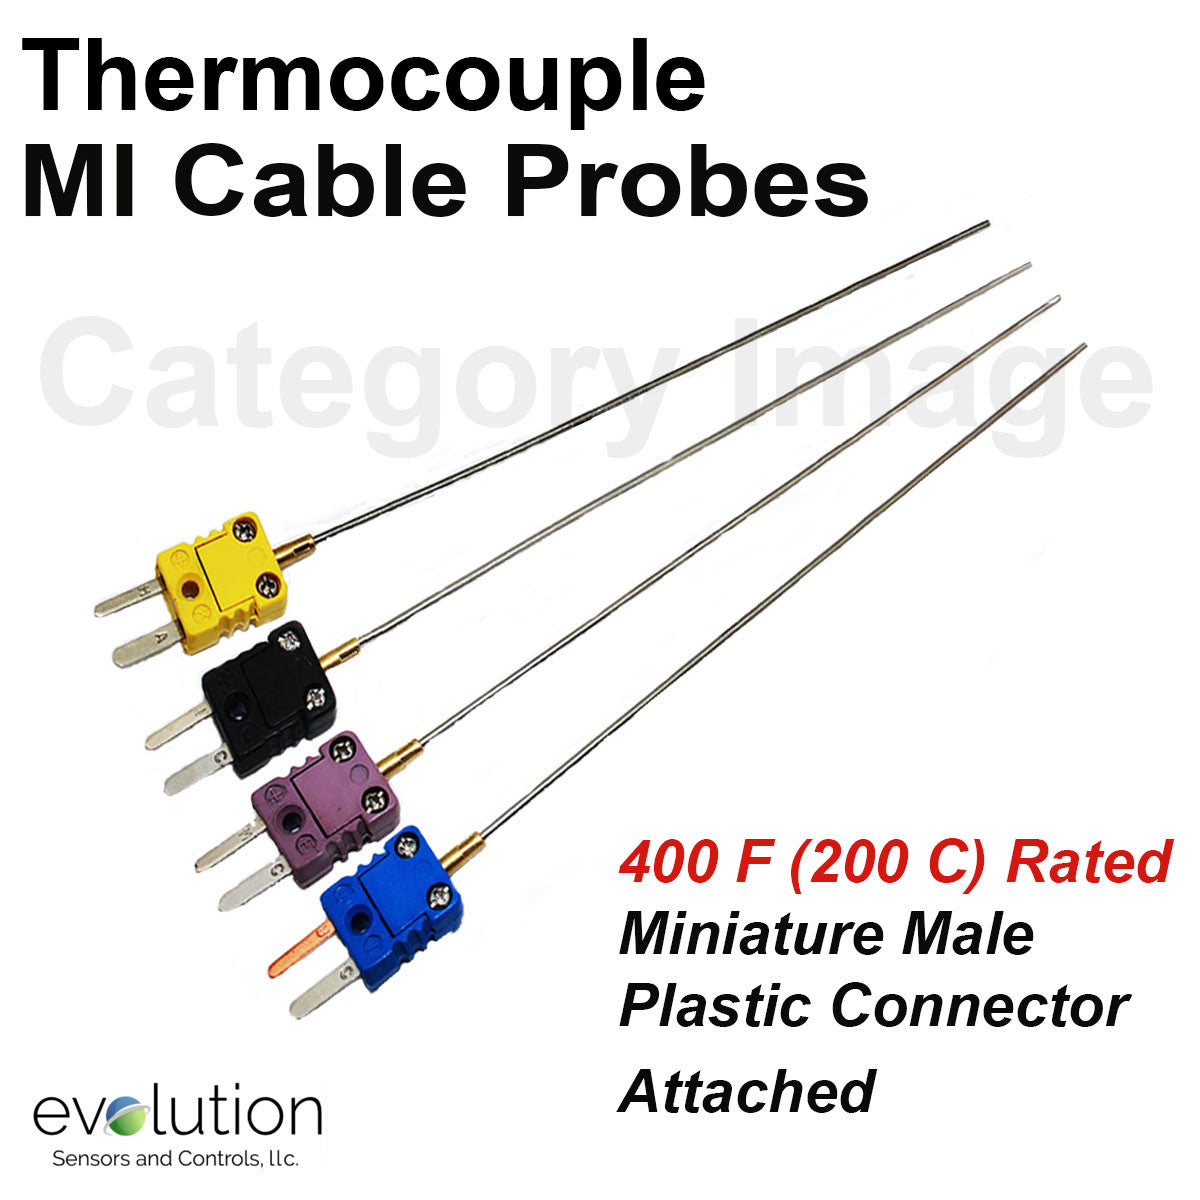 Multipin Thermocouple Connectors Air and Moisture Resistant